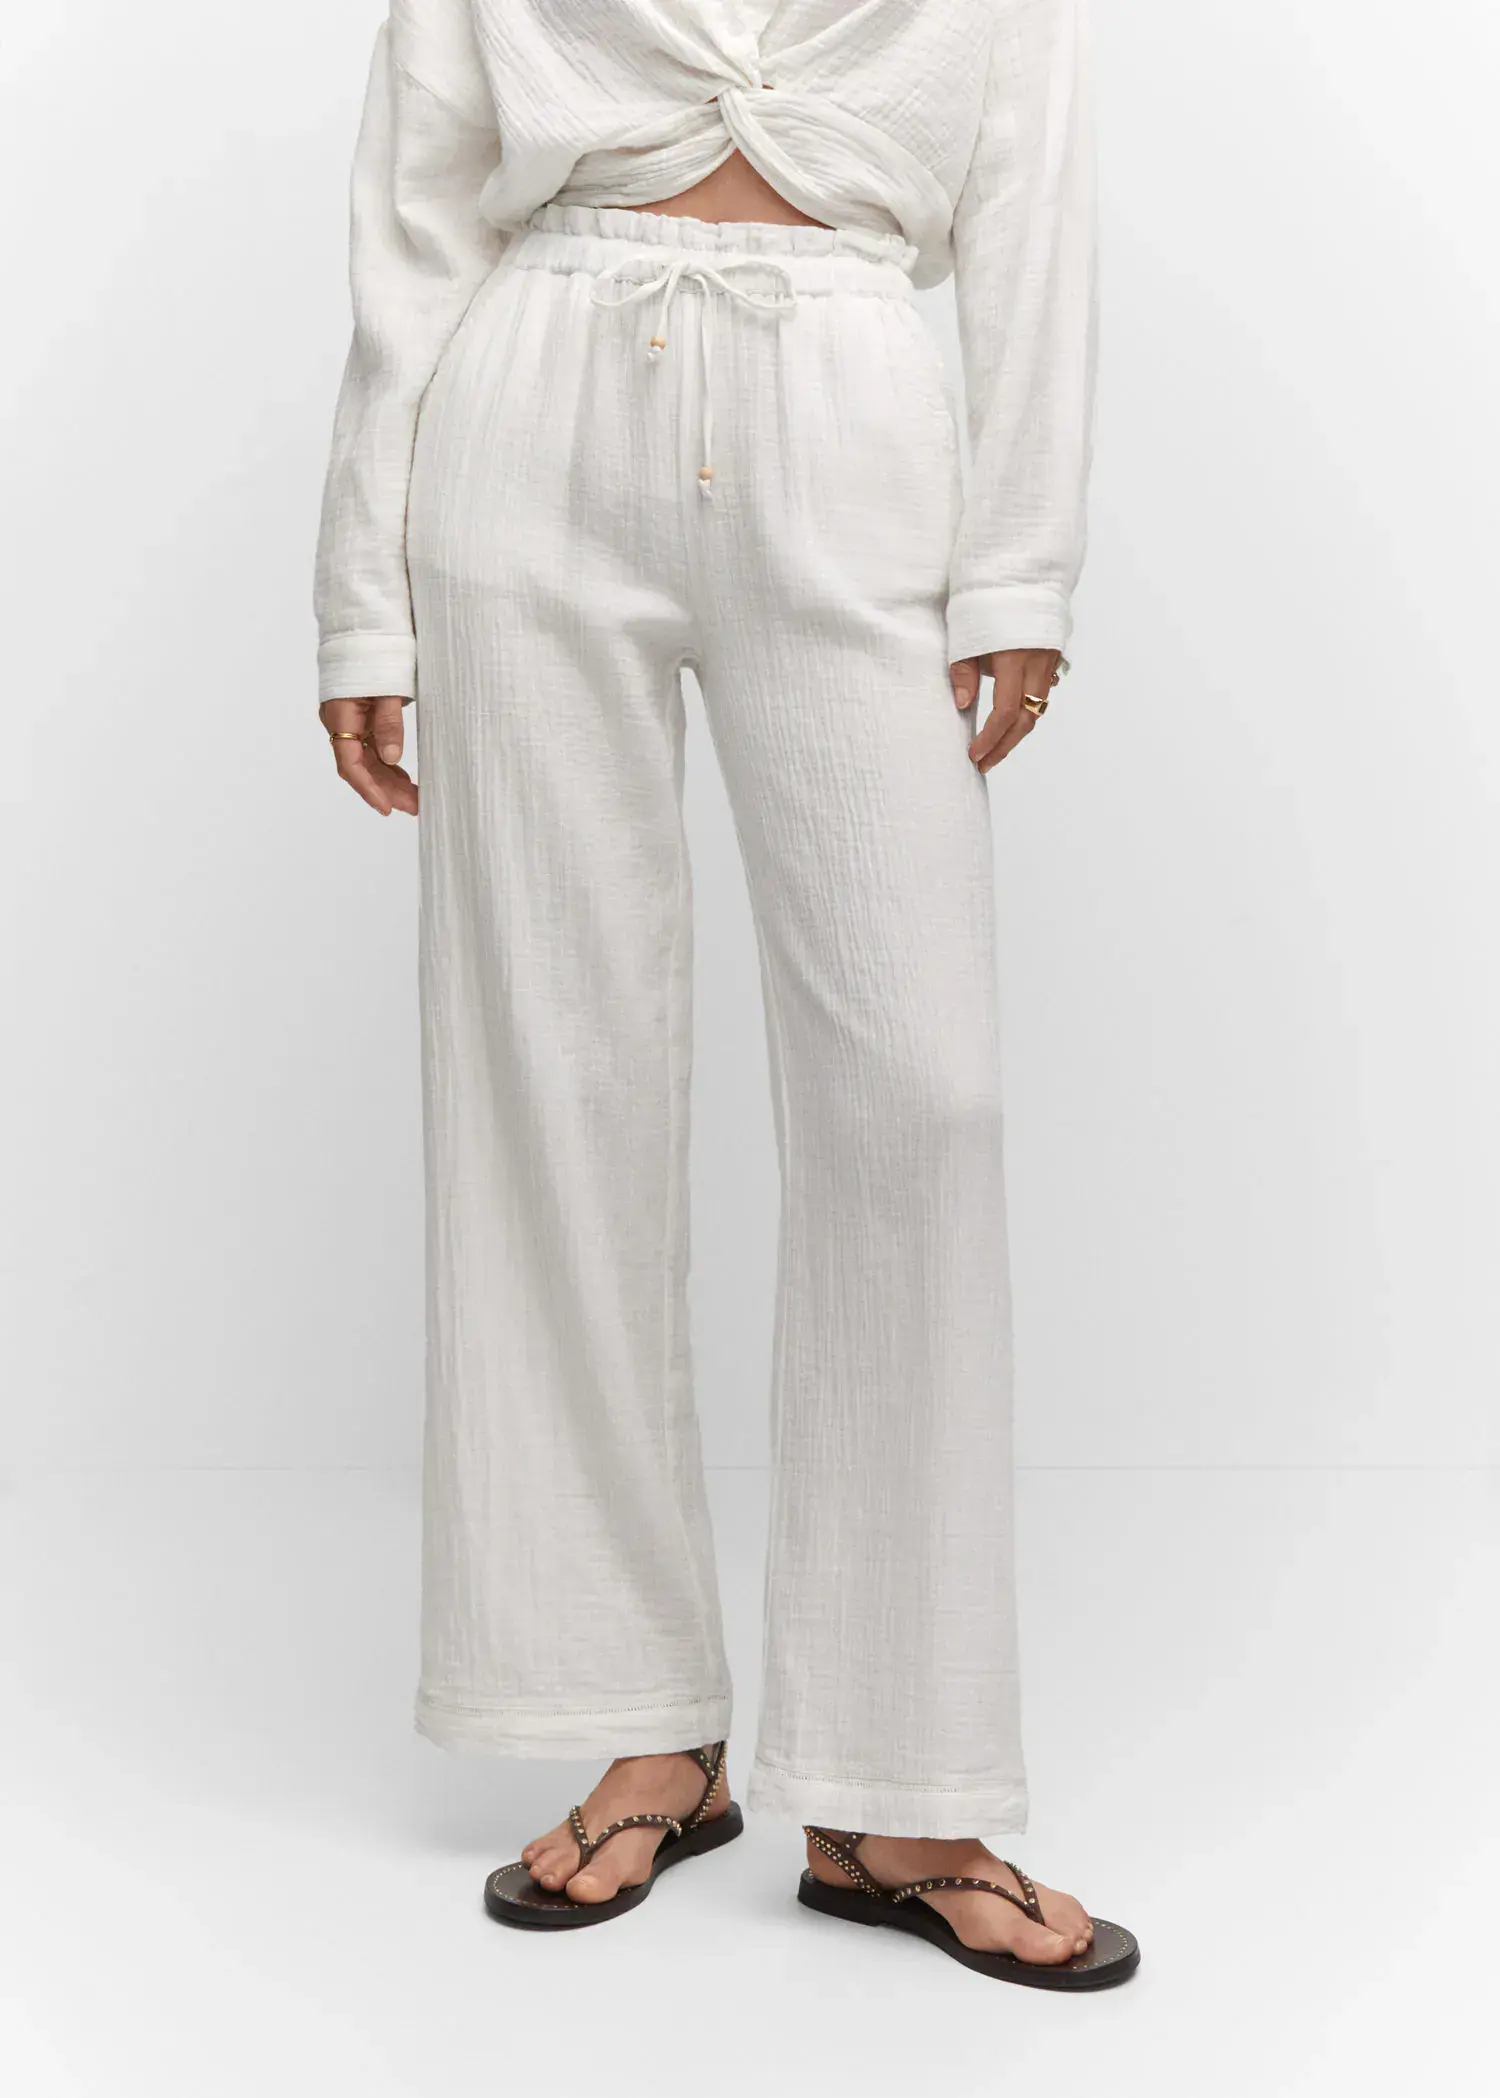 Mango Bow textured pants. a person wearing white pants and a white shirt. 